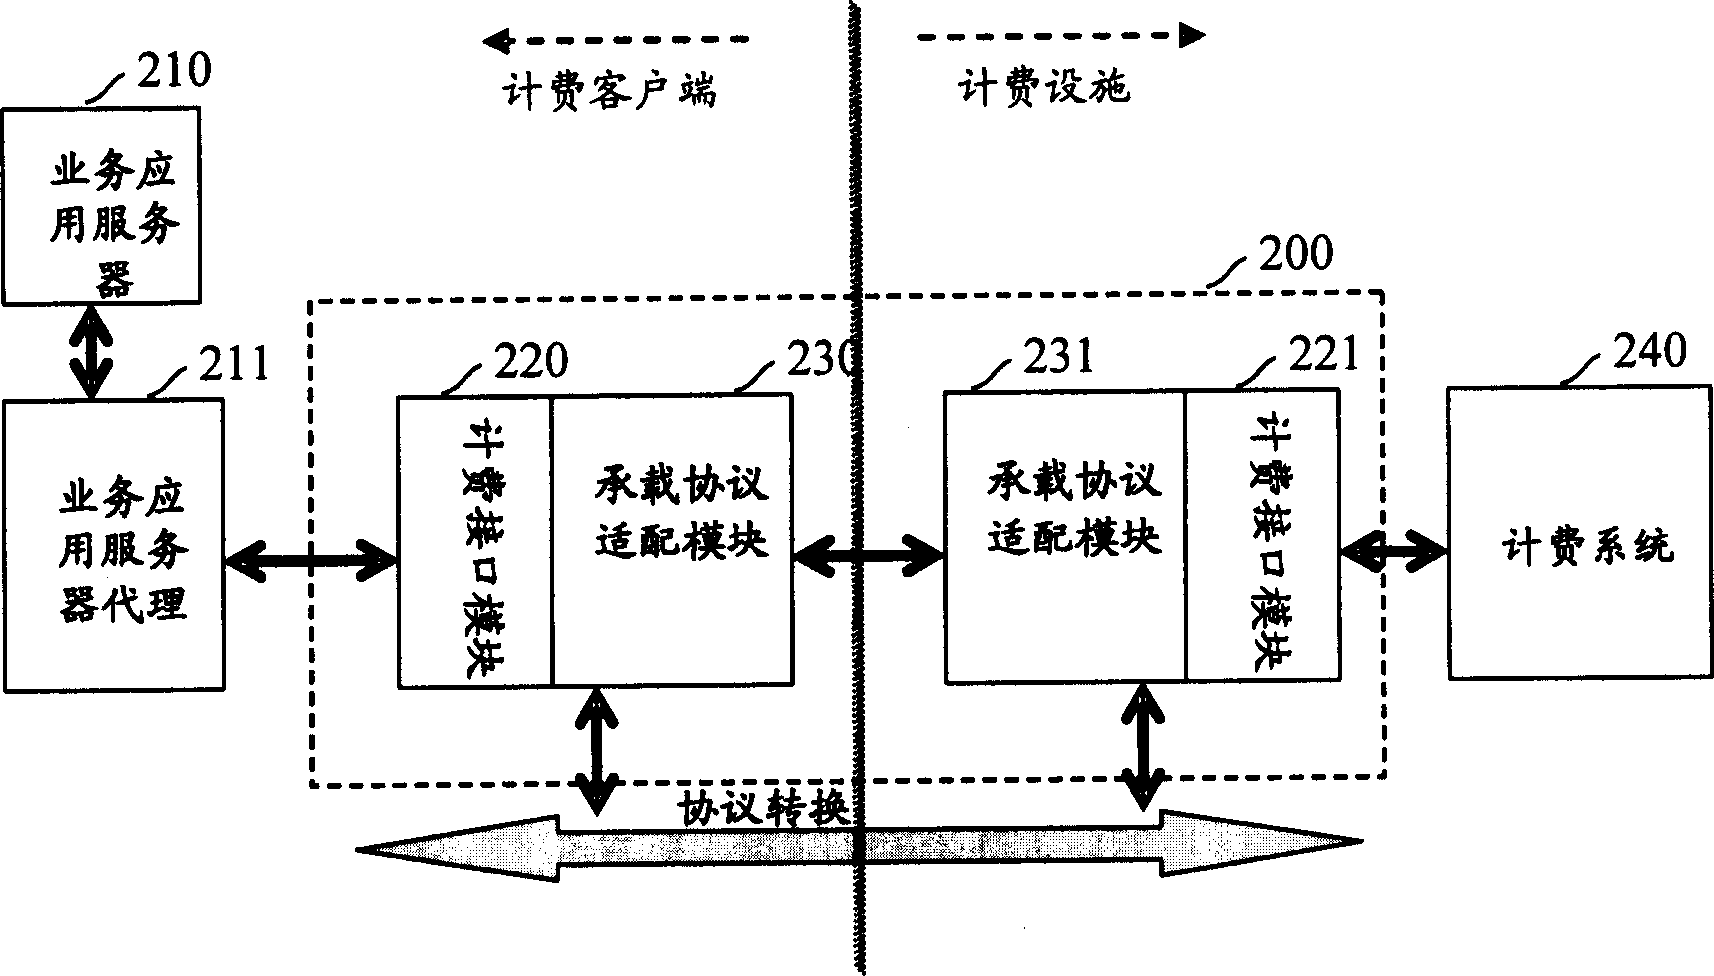 Method of cut-in charge system for OMA service application and charge angine